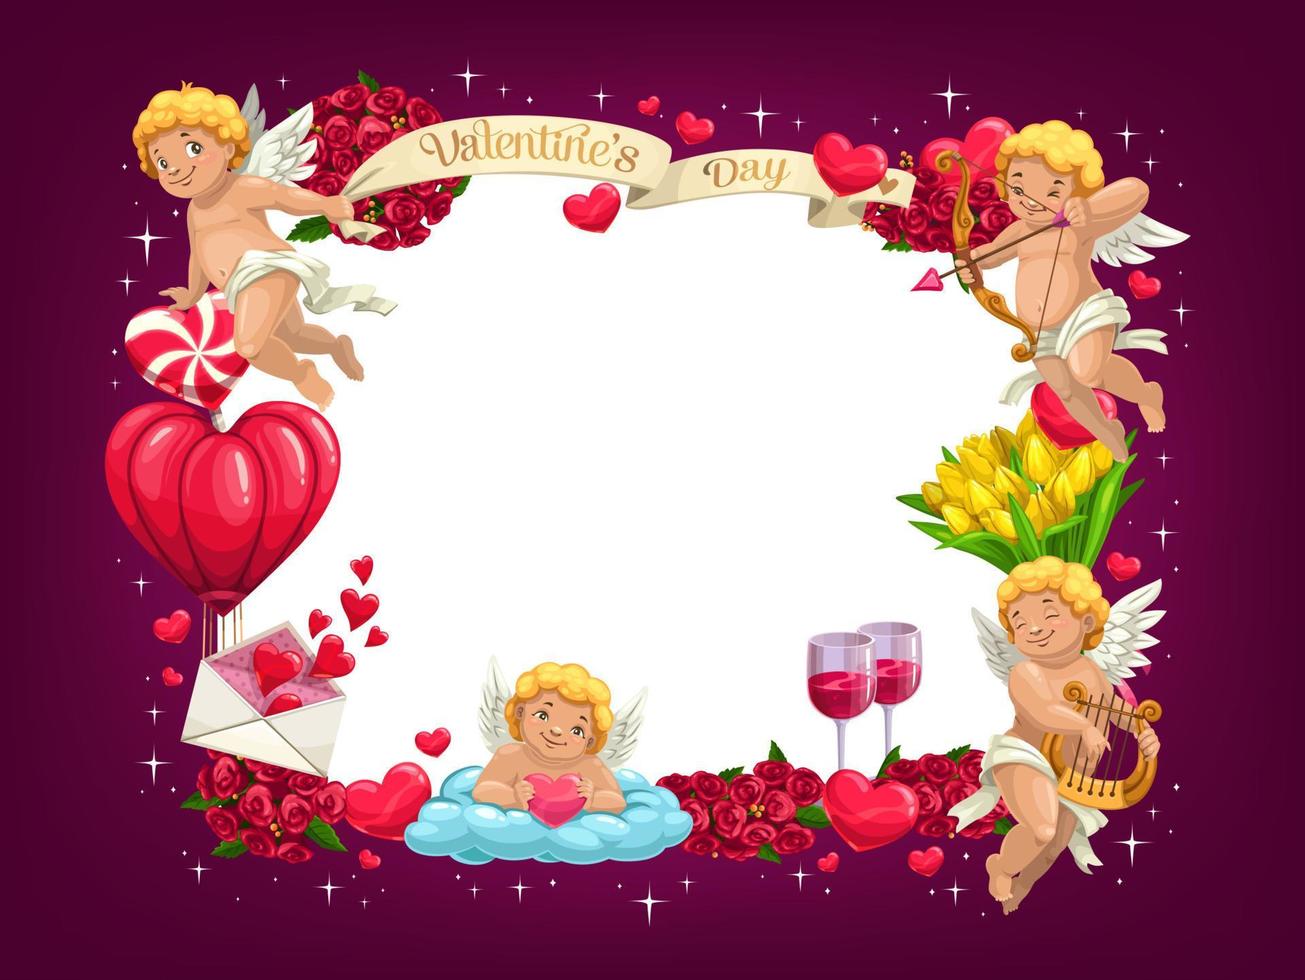 Valentines Day love hearts and flying Cupids frame vector